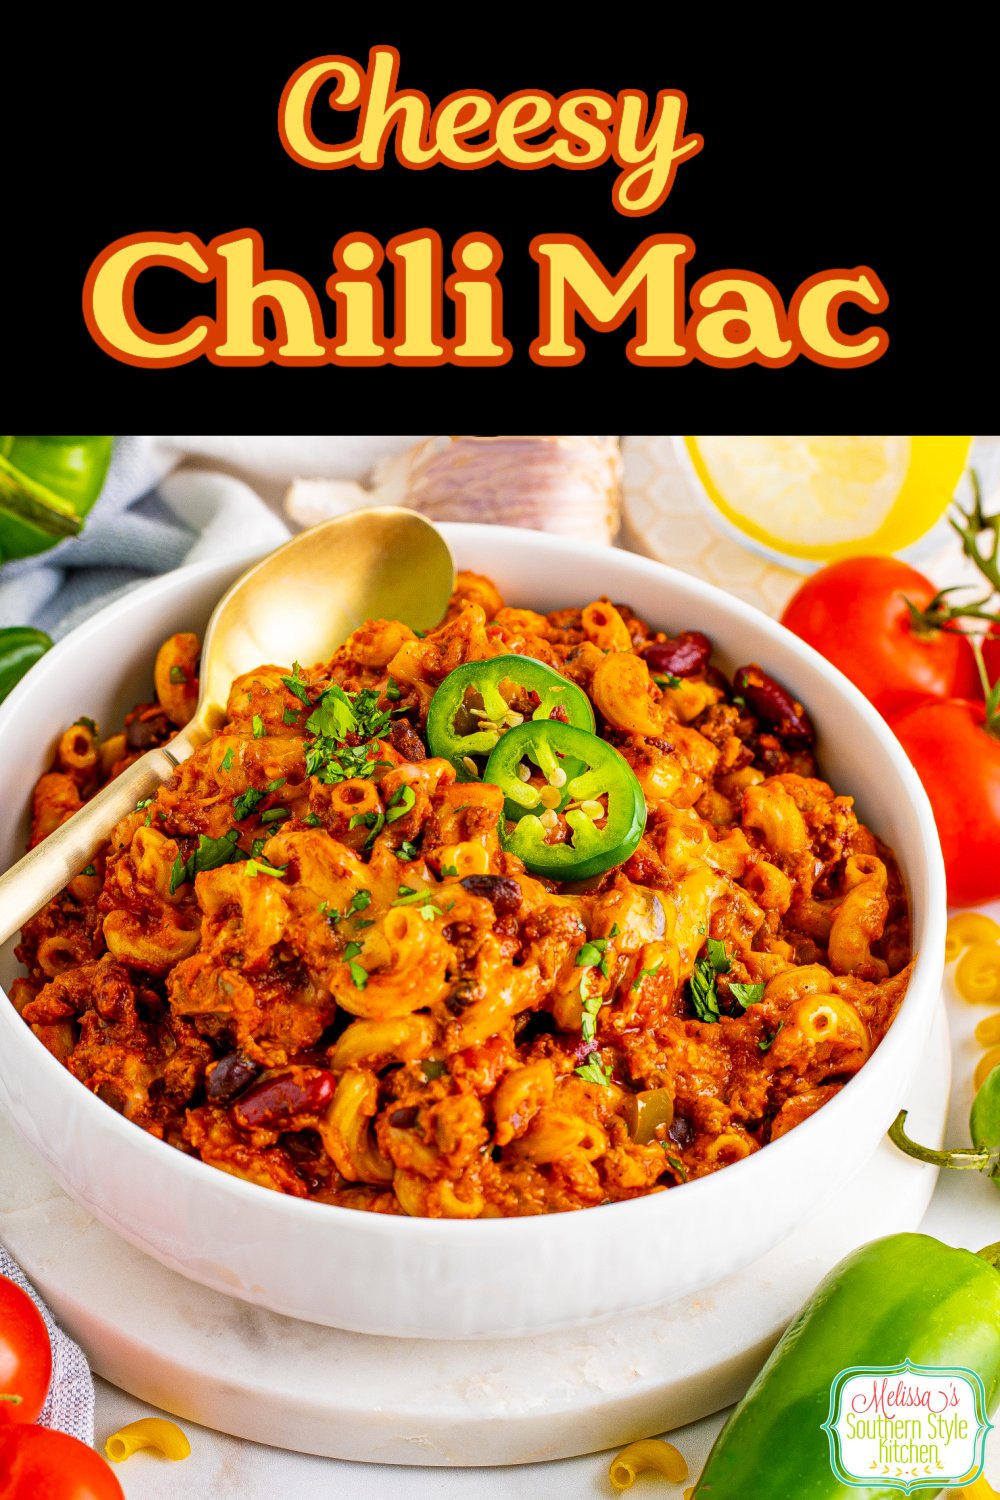 This easy Chili Mac Recipe is a one pot meal that's made entirely on the stovetop #chiliwithbeans #chilimac #chilimacaroni #easygroundbeefrecipes #chili #macaronirecipes #groundbeef #easychilimac #stovetopchilimac